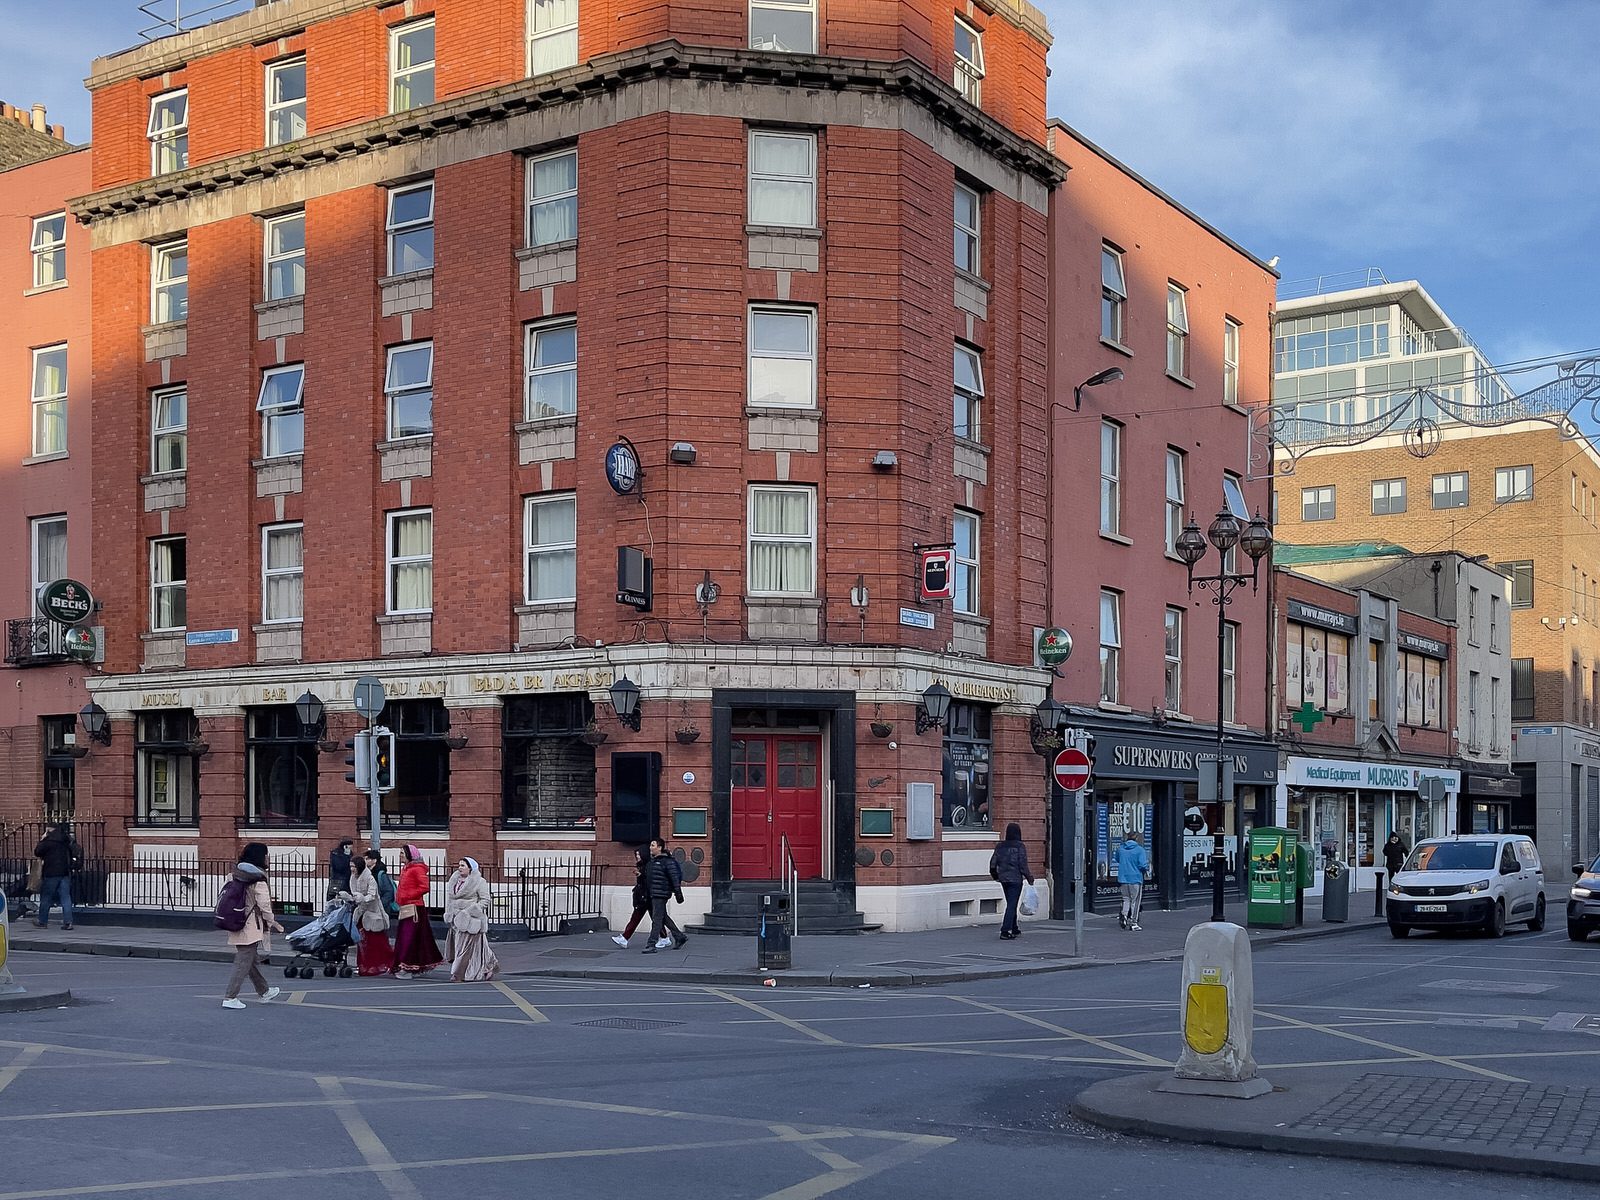 TALBOT STREET [FAILS TO MEET ITS POTENTIAL AS A MAJOR SHOPPING STREET]-225732-1